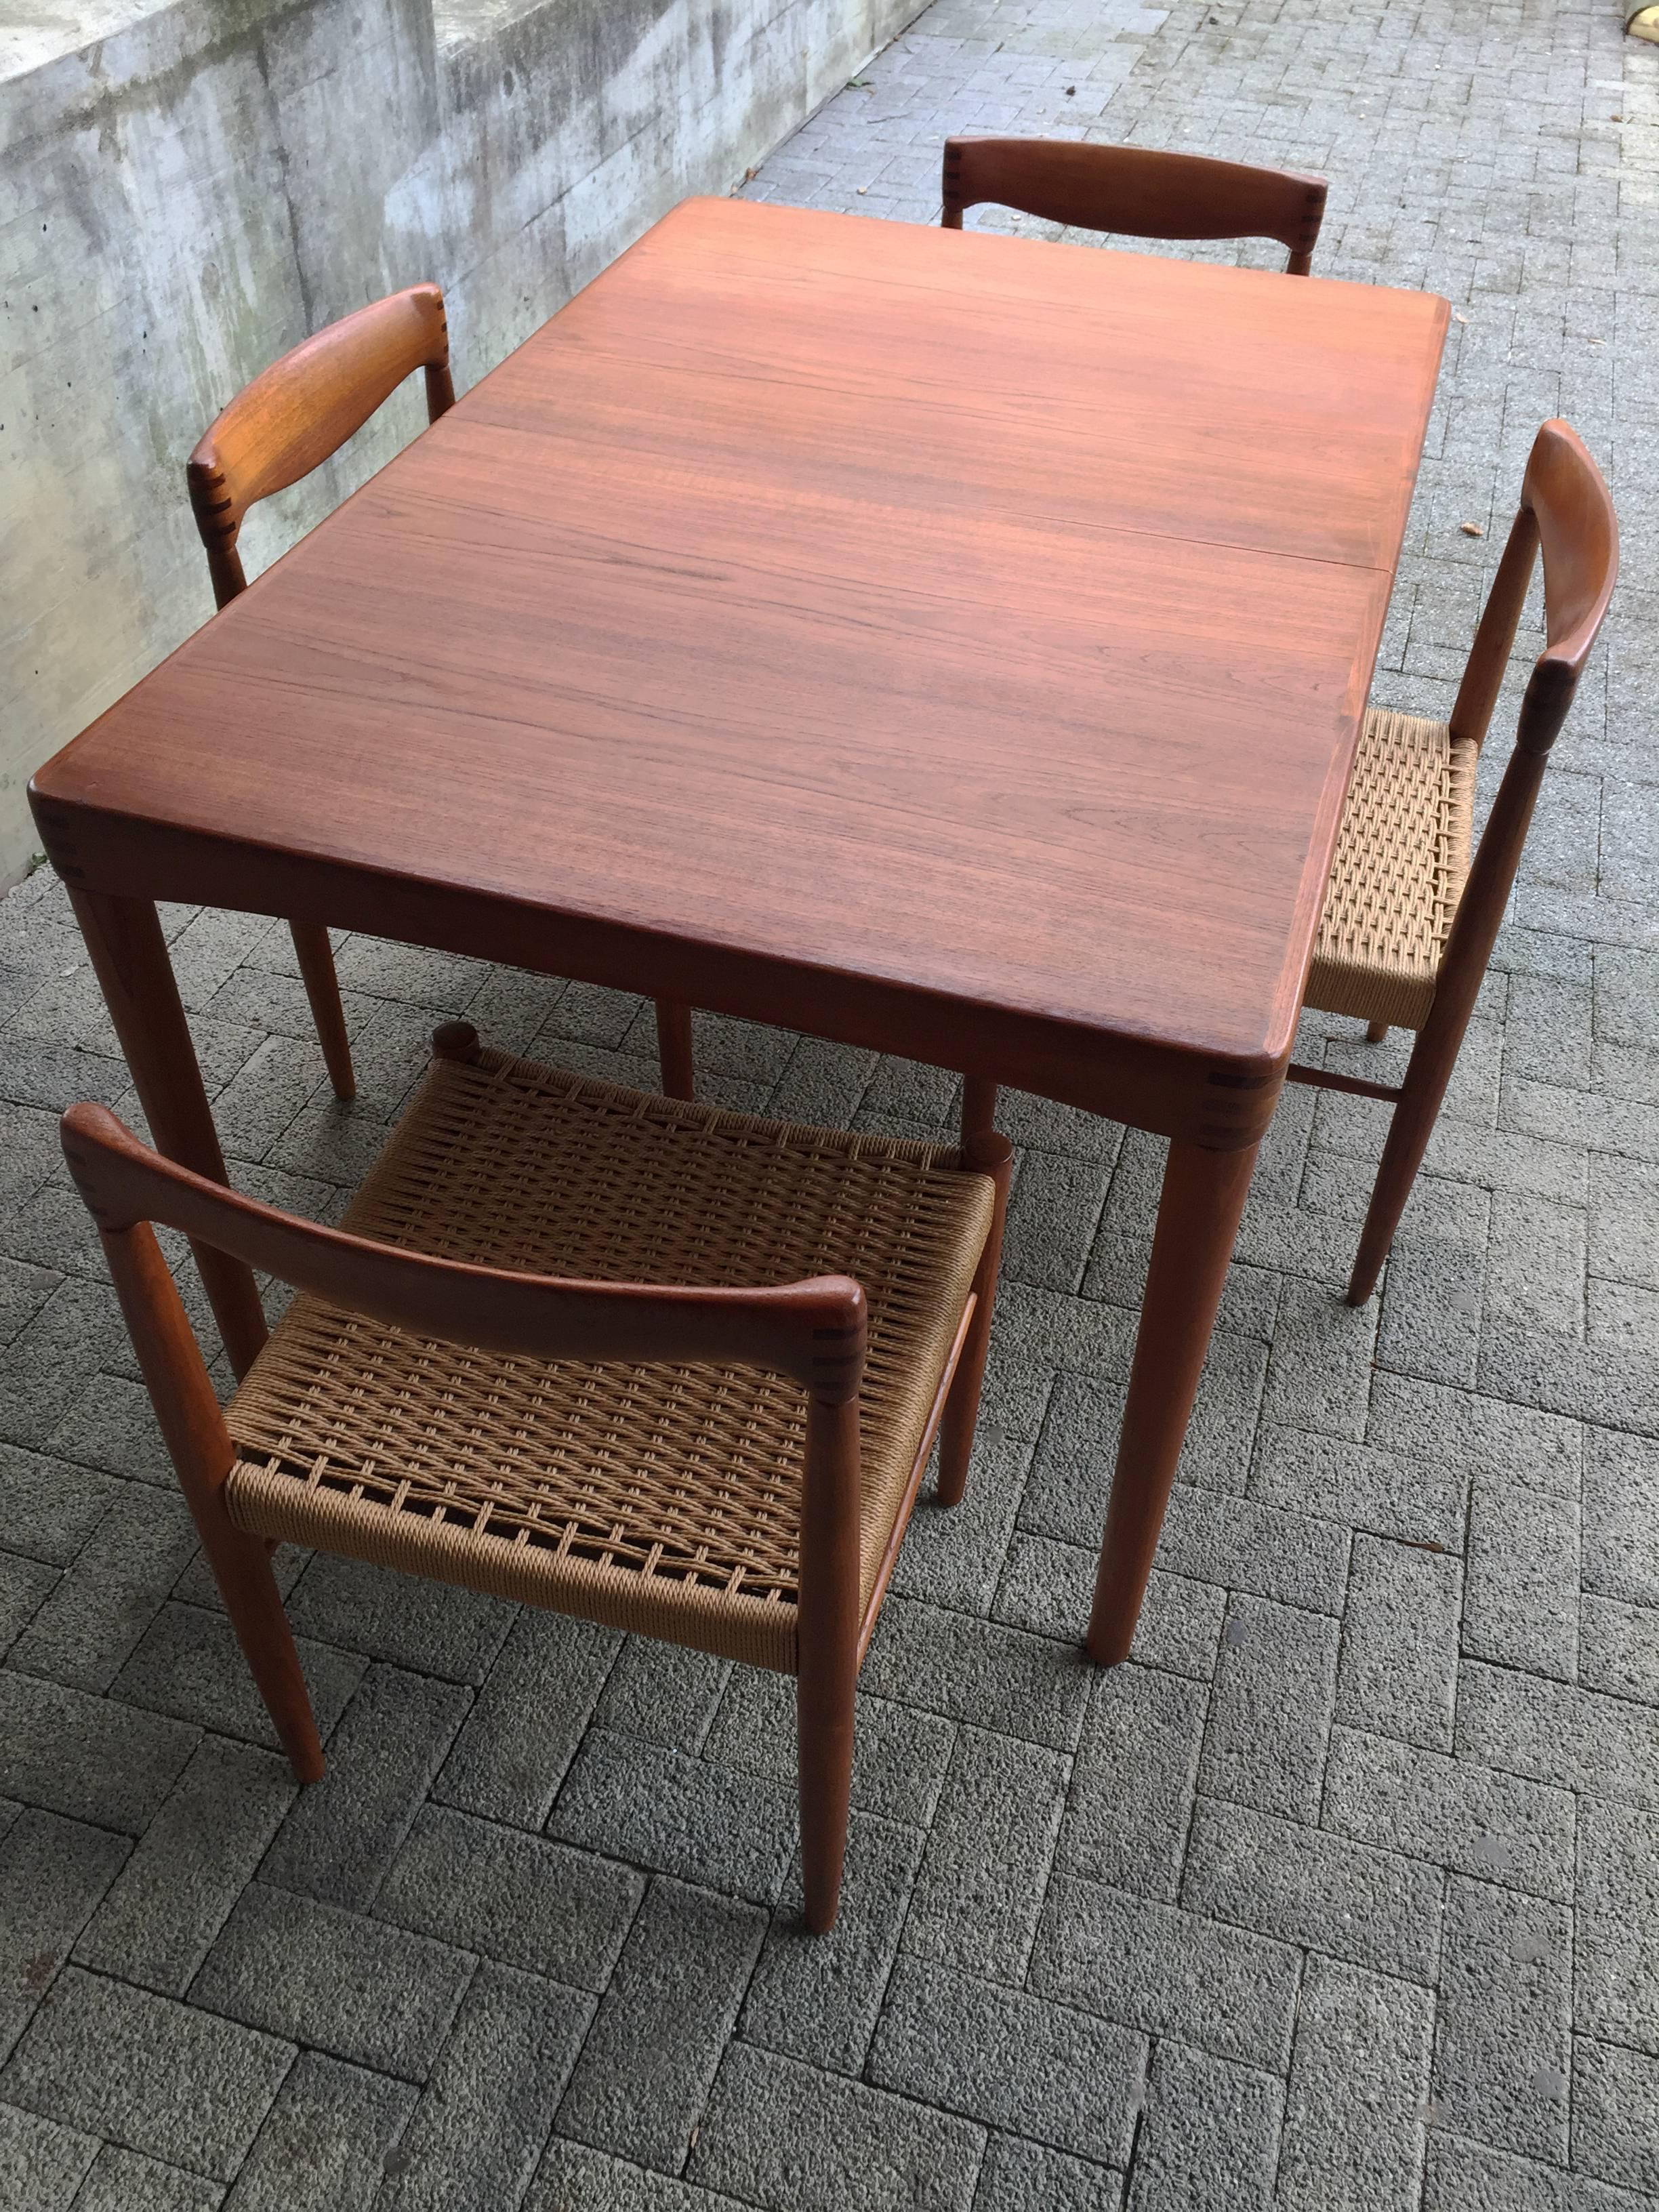 This dining table comes with four chairs made from solid teak wood. The table can seat between four-six people measuring 90 x 135cm. It can be extended to 195 cm and can seat eight-ten people then. The extension leaf is hidden underneath the top.